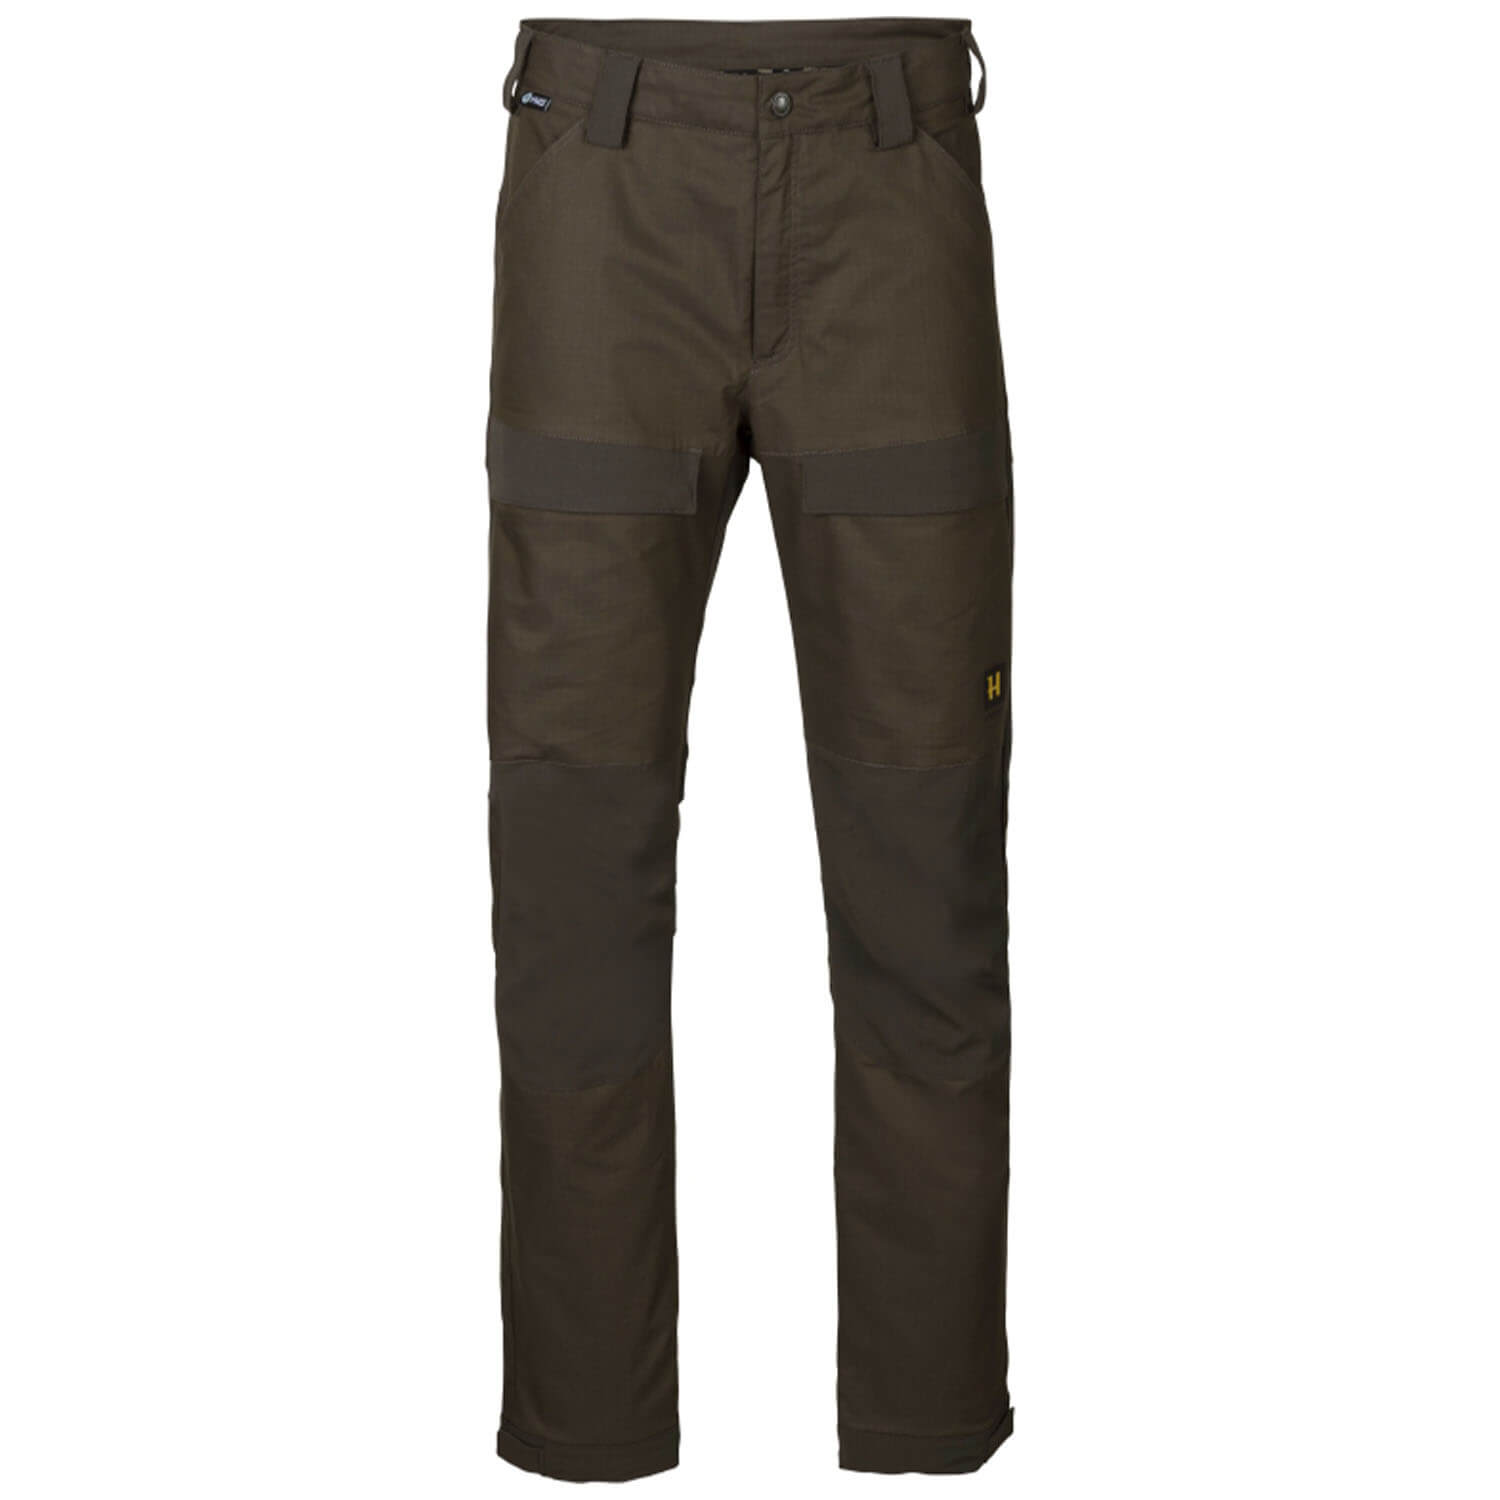 Härkila hunting trousers nordic hunter hws (Willow Green) - Hunting Trousers